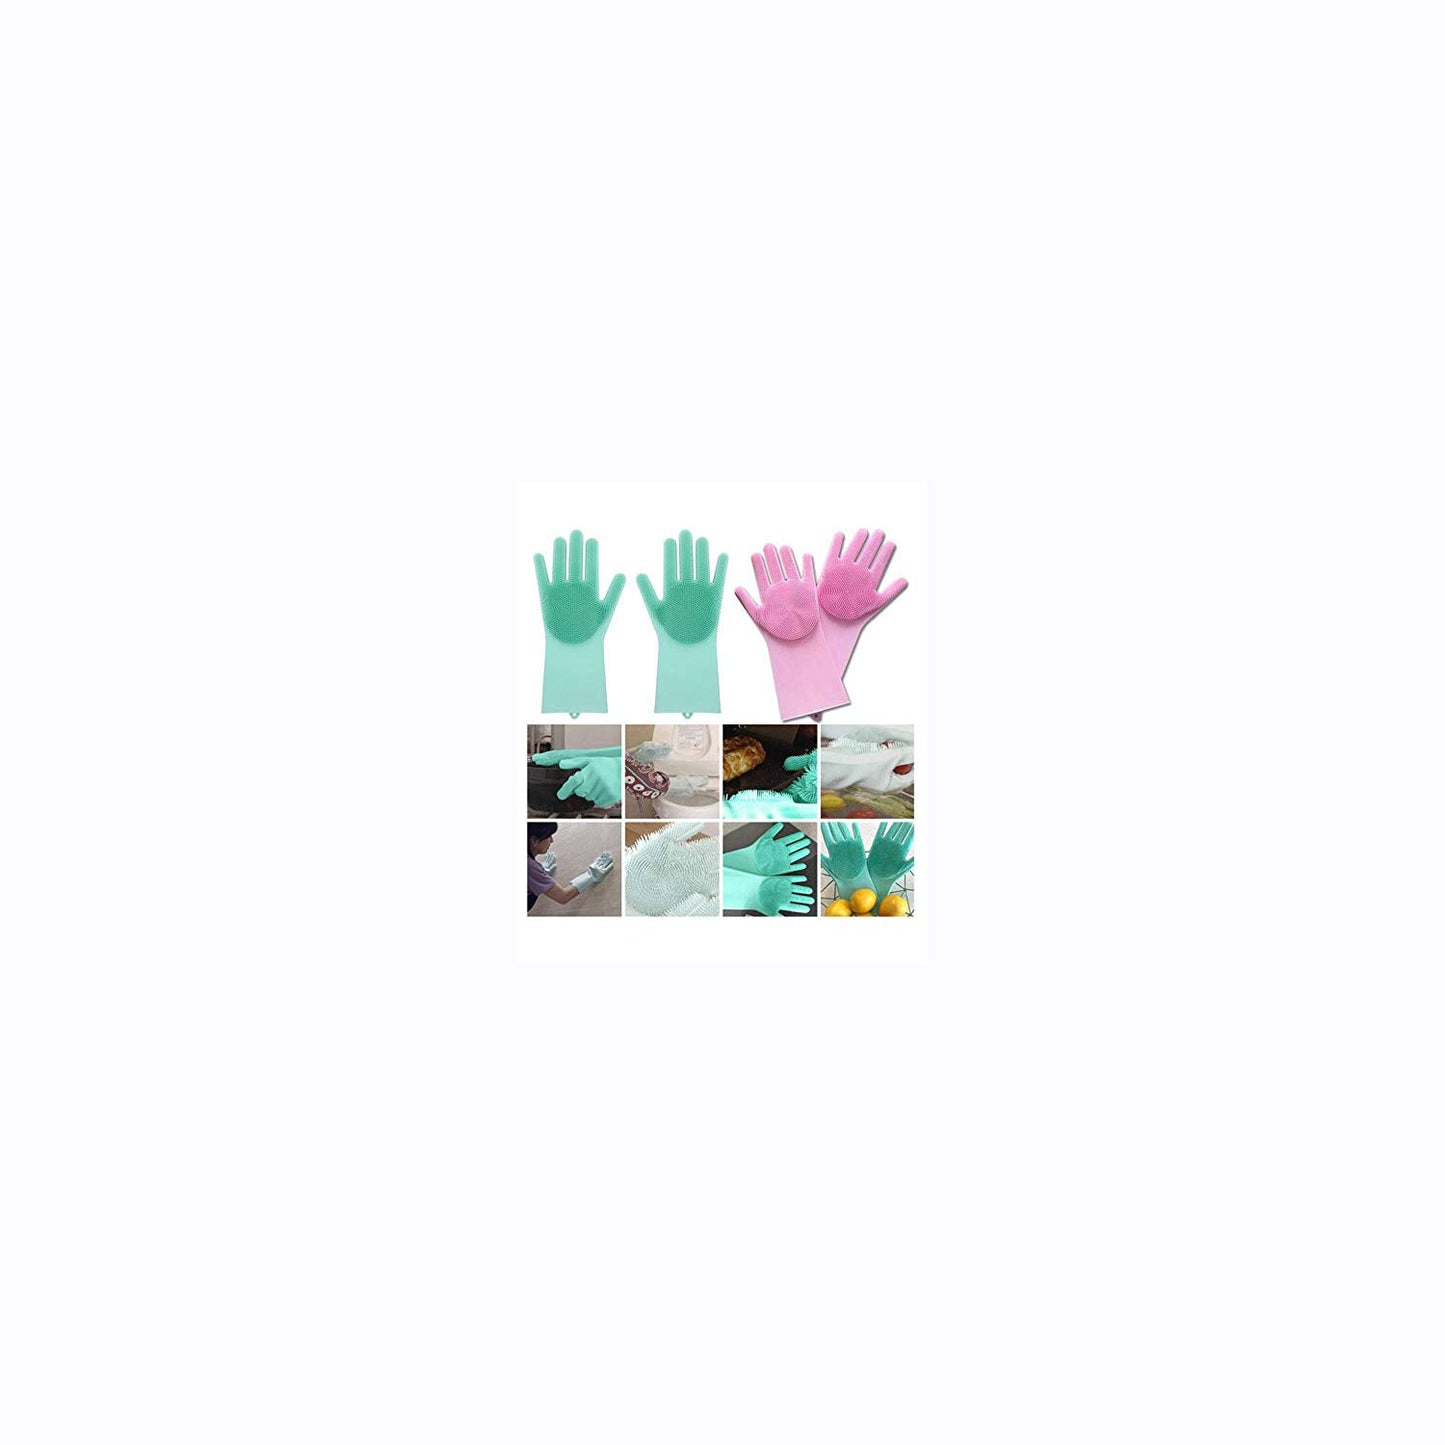 Silicone Gloves with Wash Scrubber, Reusable Brush Heat Resistant